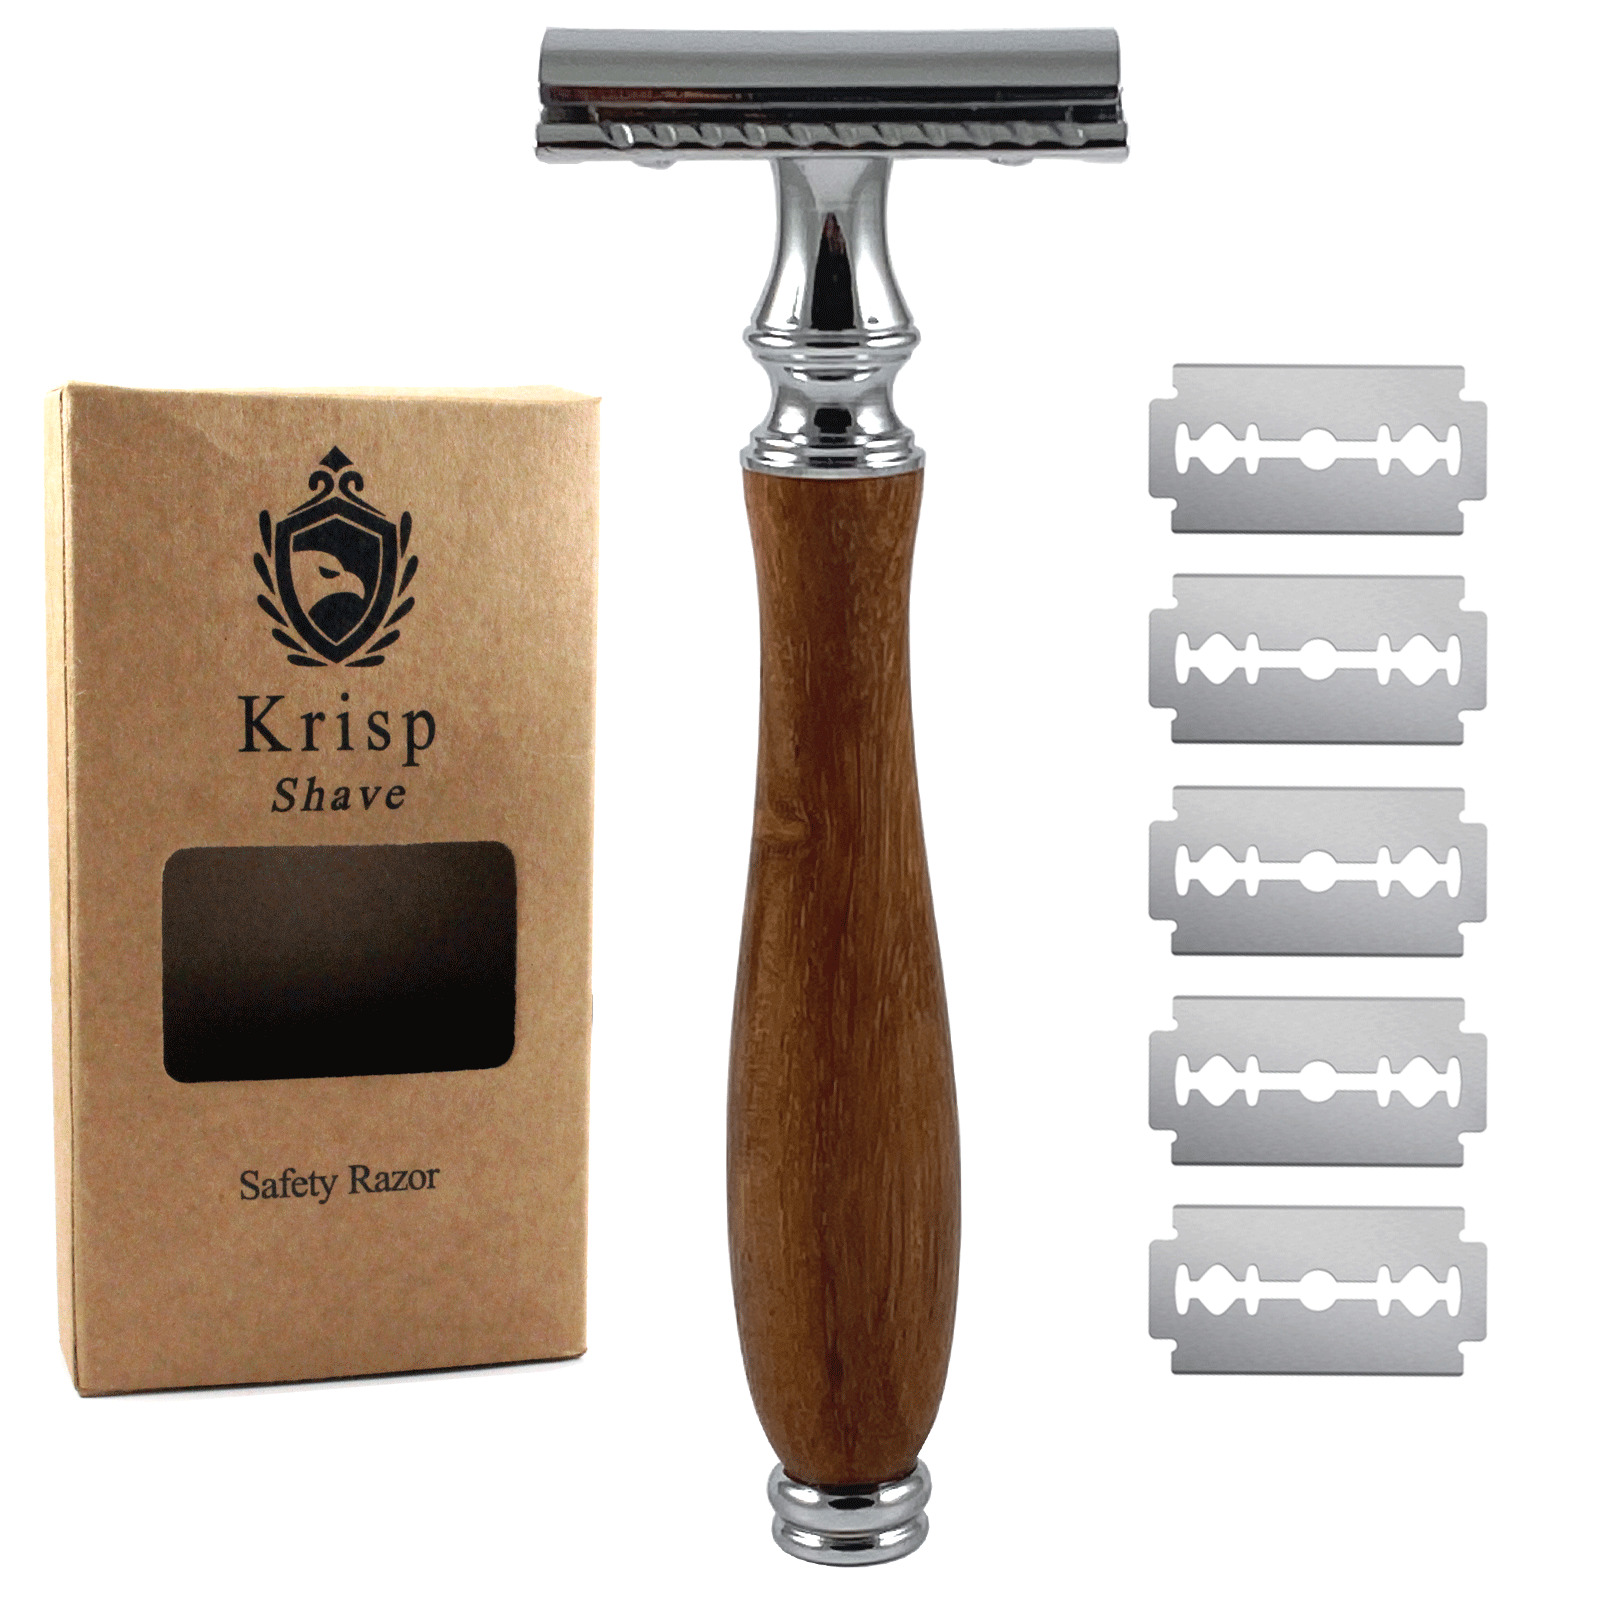 LONG WOODEN HANDLE DOUBLE EDGE SAFETY RAZOR FOR MEN BEARD WET SHAVE + 10 BLADES